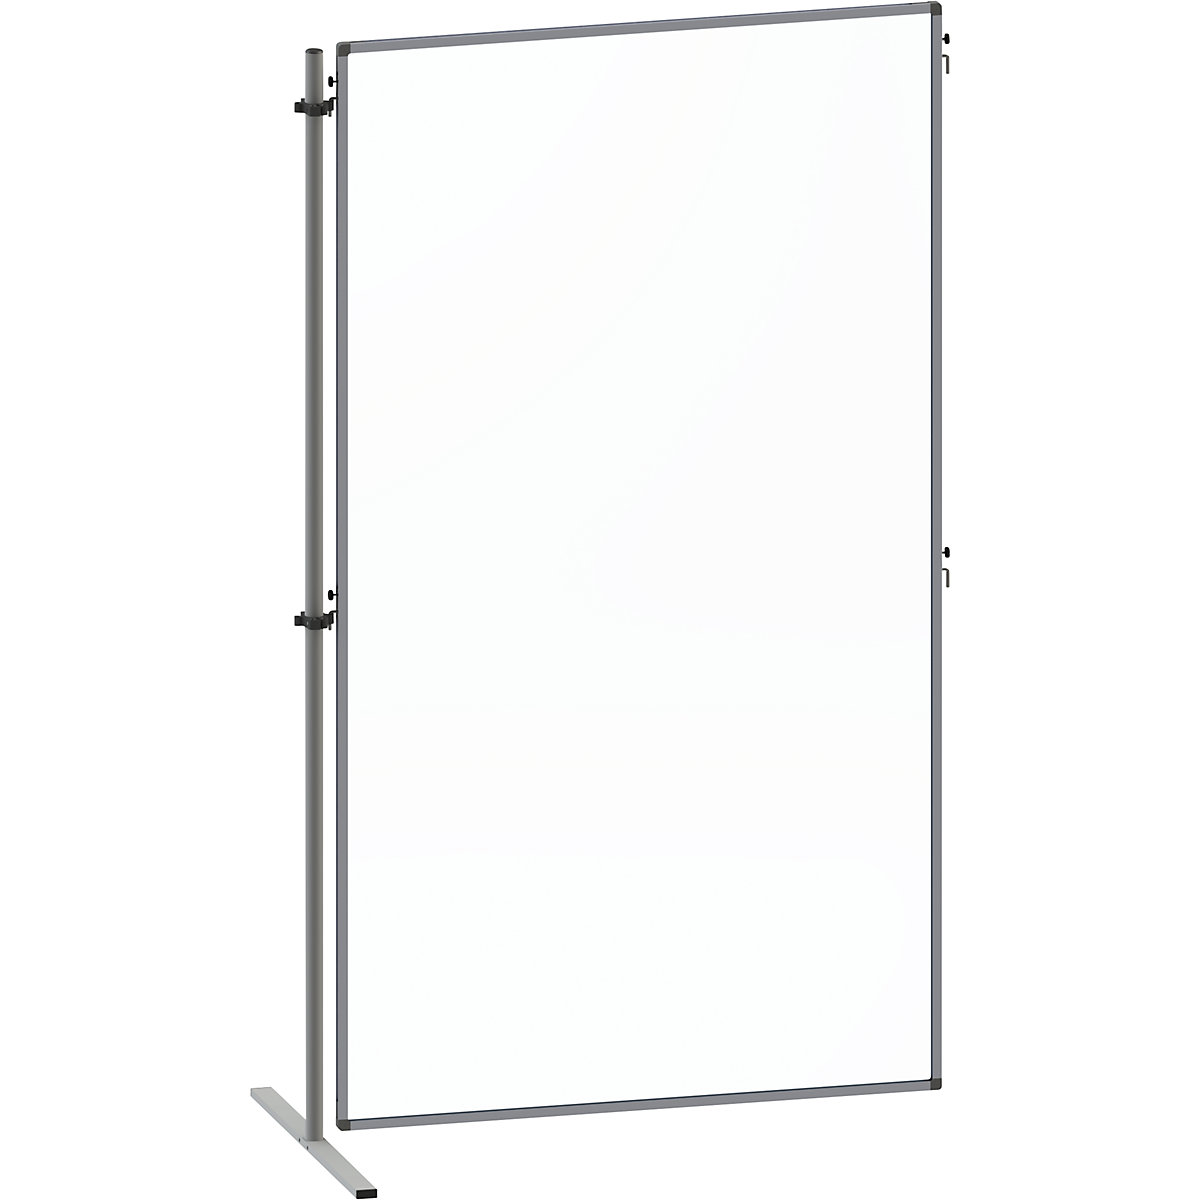 Functional partition made of acrylic glass